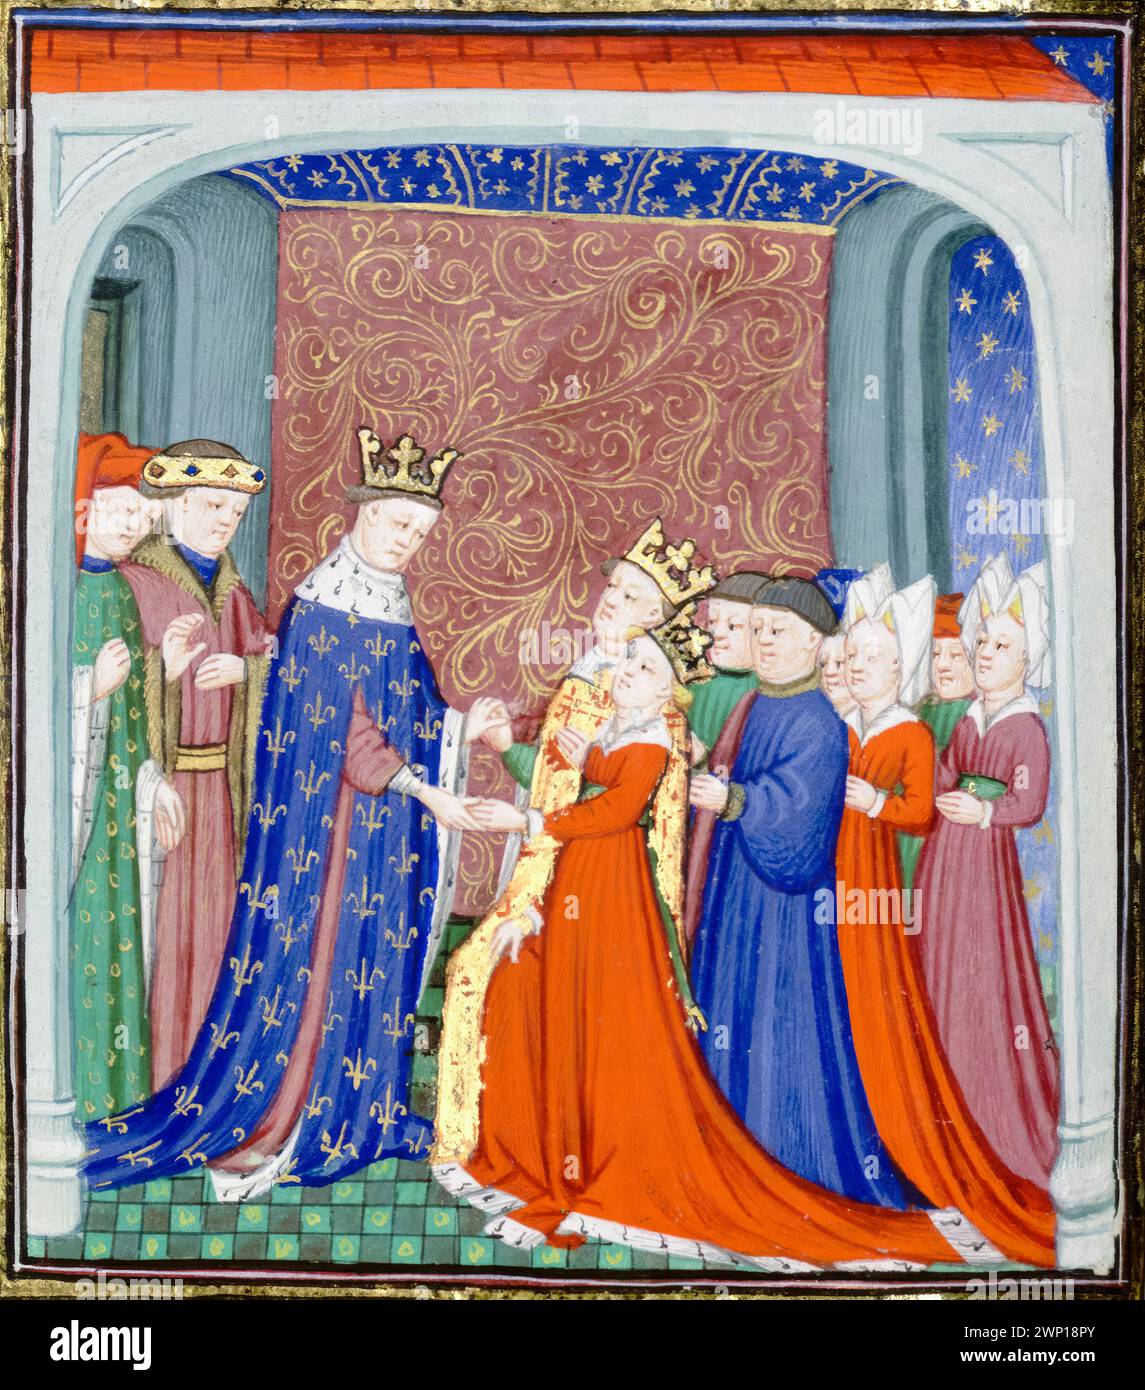 David II of Scotland (1324-1371), his wife, Joan of the Tower (1321-1362), Queen Consort of Scotland, and King Philip VI of France (1293-1350), illuminated manuscript painting by Jean Froissart, before 1499 Stock Photo